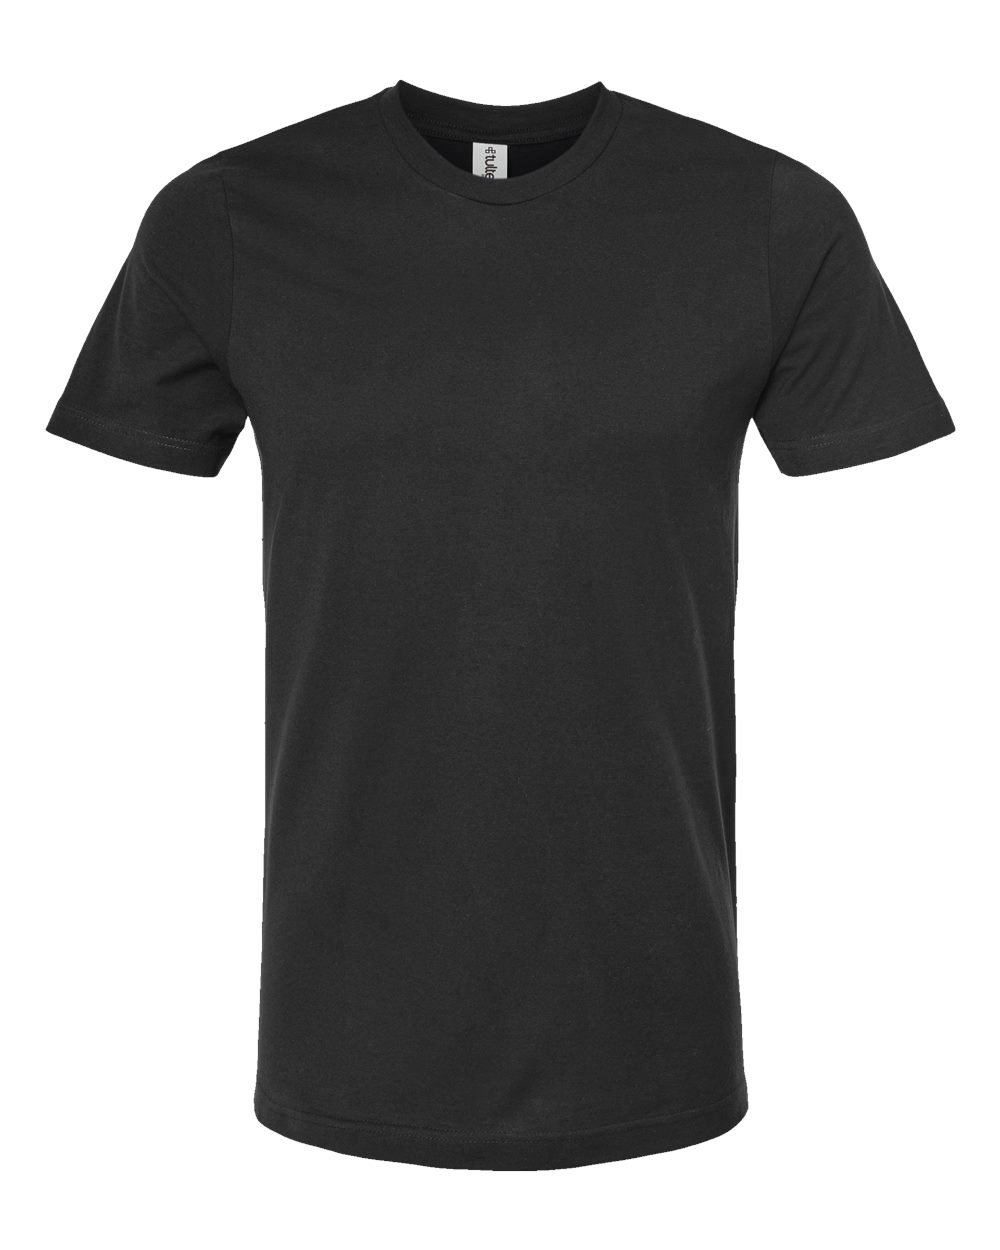 Tultex 602 - Combed Cotton T-Shirt